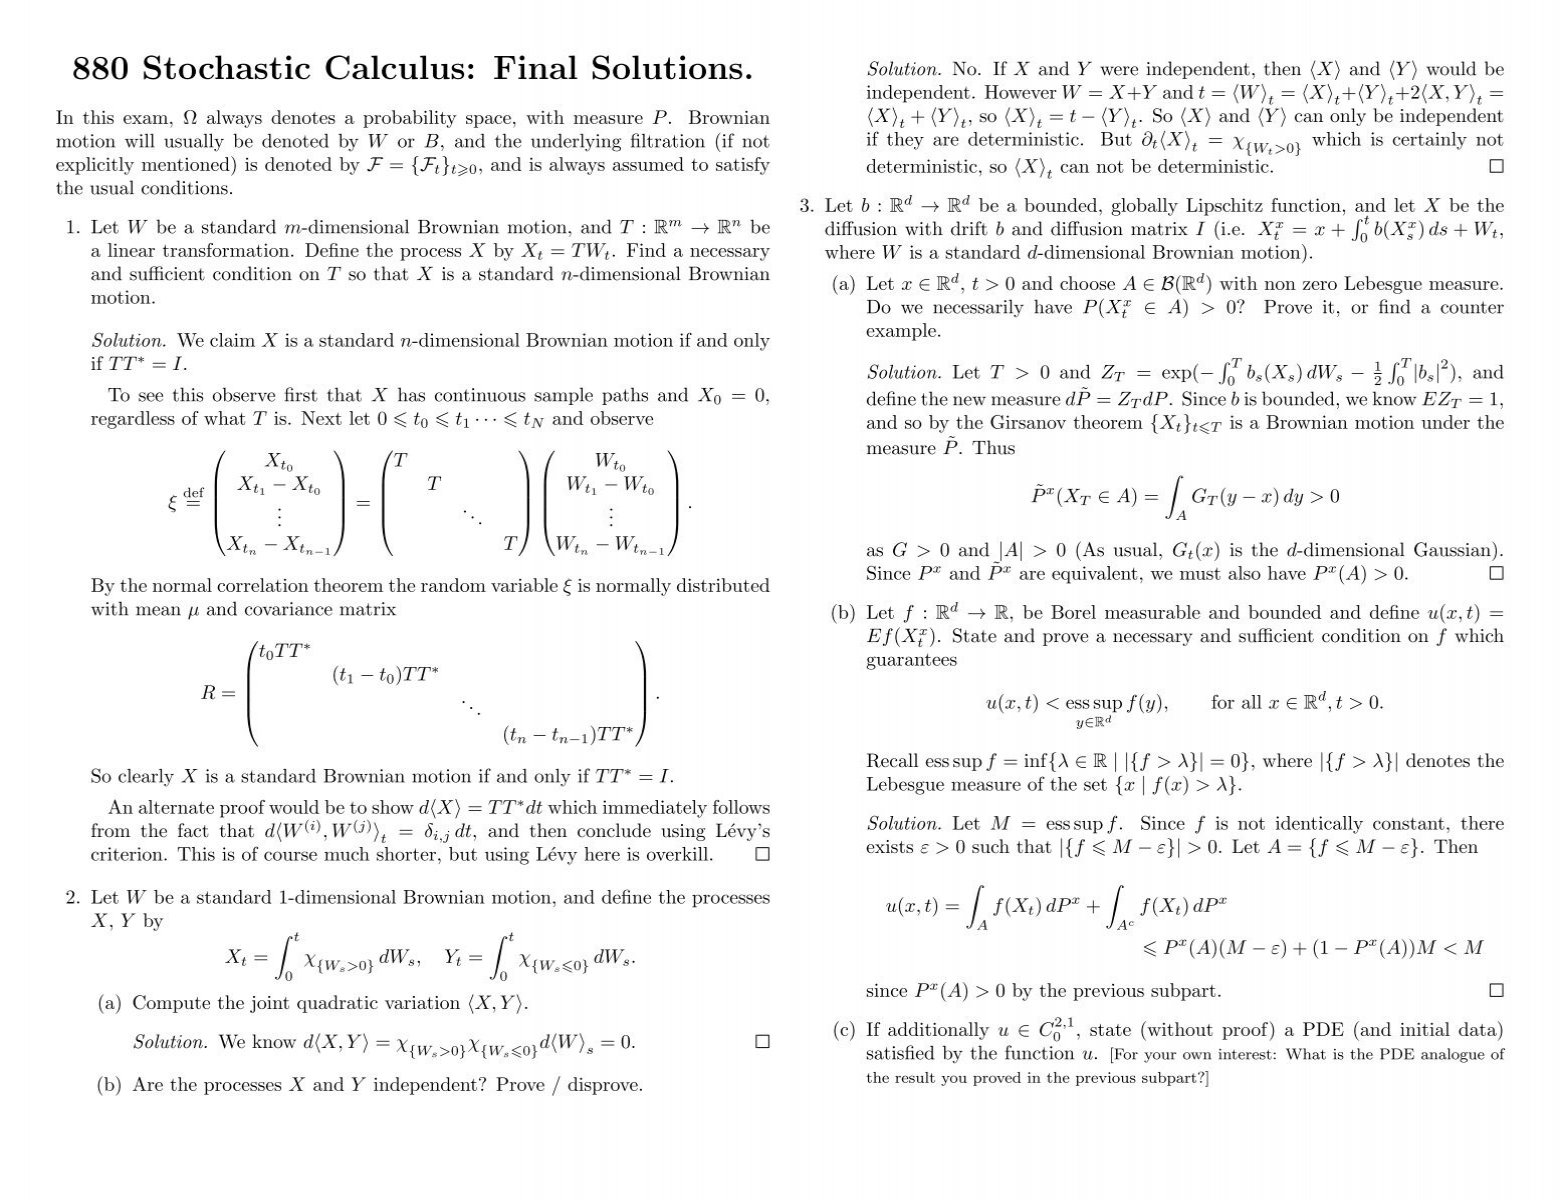 0 Stochastic Calculus Final Solutions